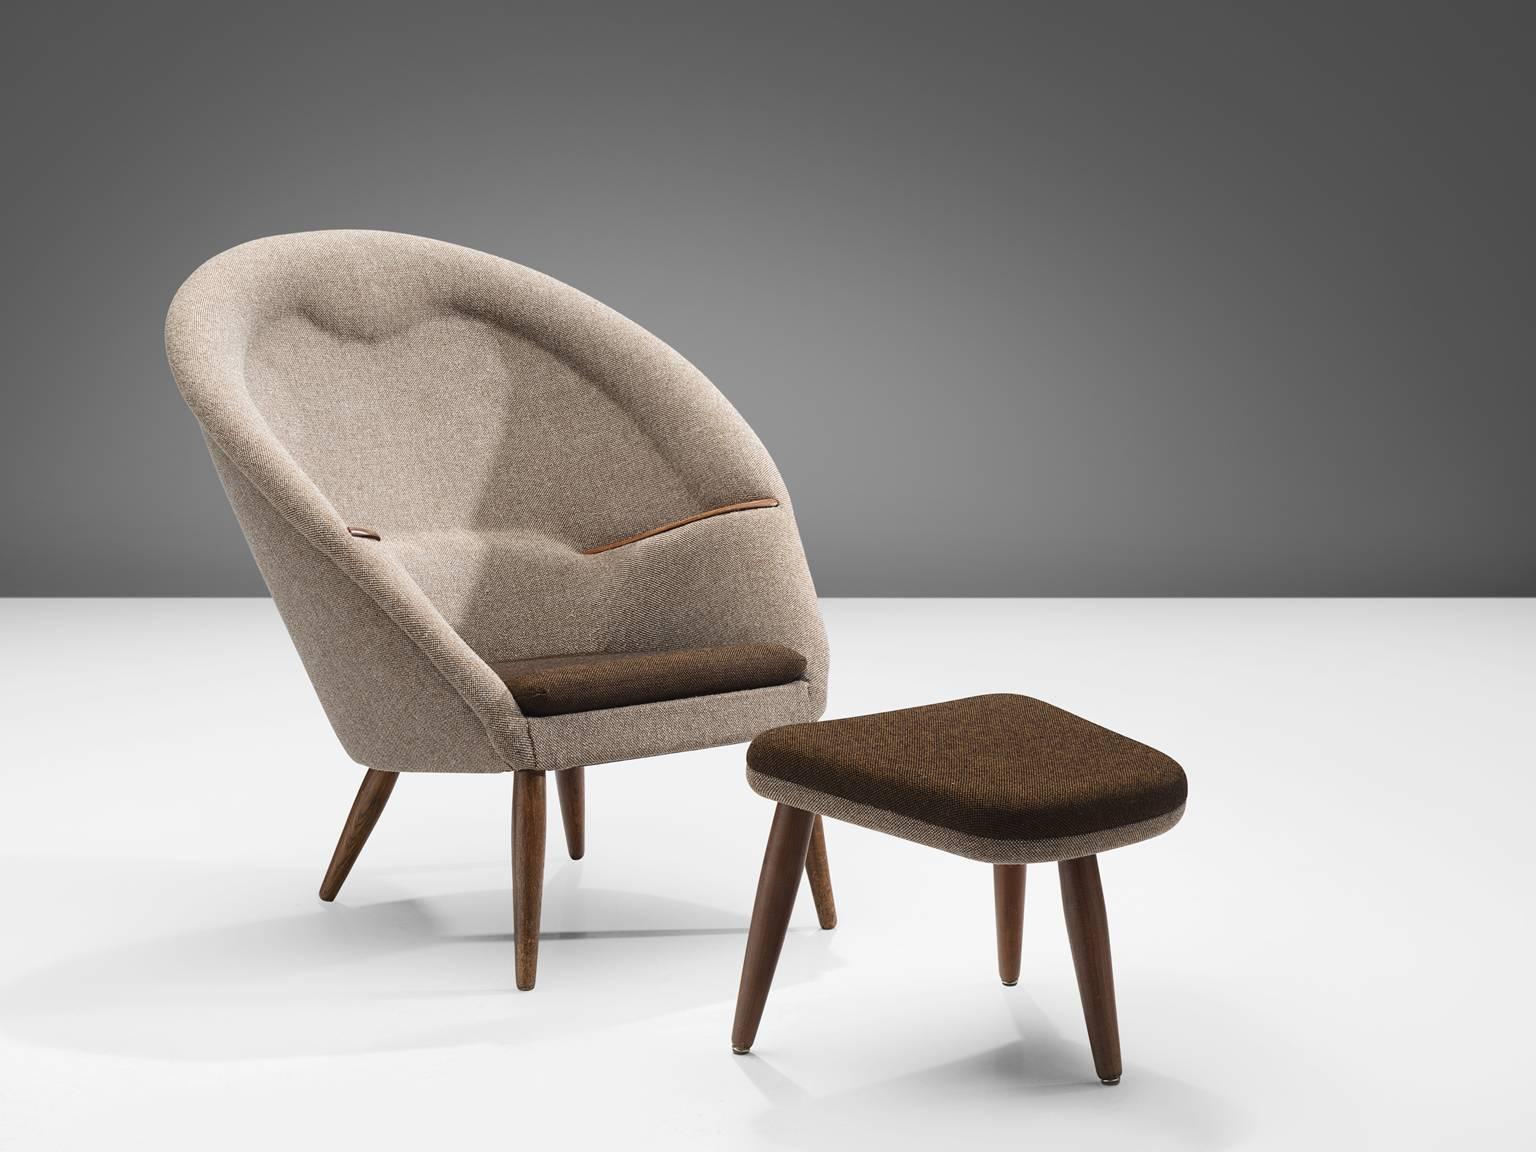 Nanna Ditzel, 'nursing' chair, hallingdal brown and beige fabric and wood, Denmark, 1953.

This round and comfortable armchair is designed by Nanna Ditzel. The chair features four thick legs that become smaller towards the top and bottom. The